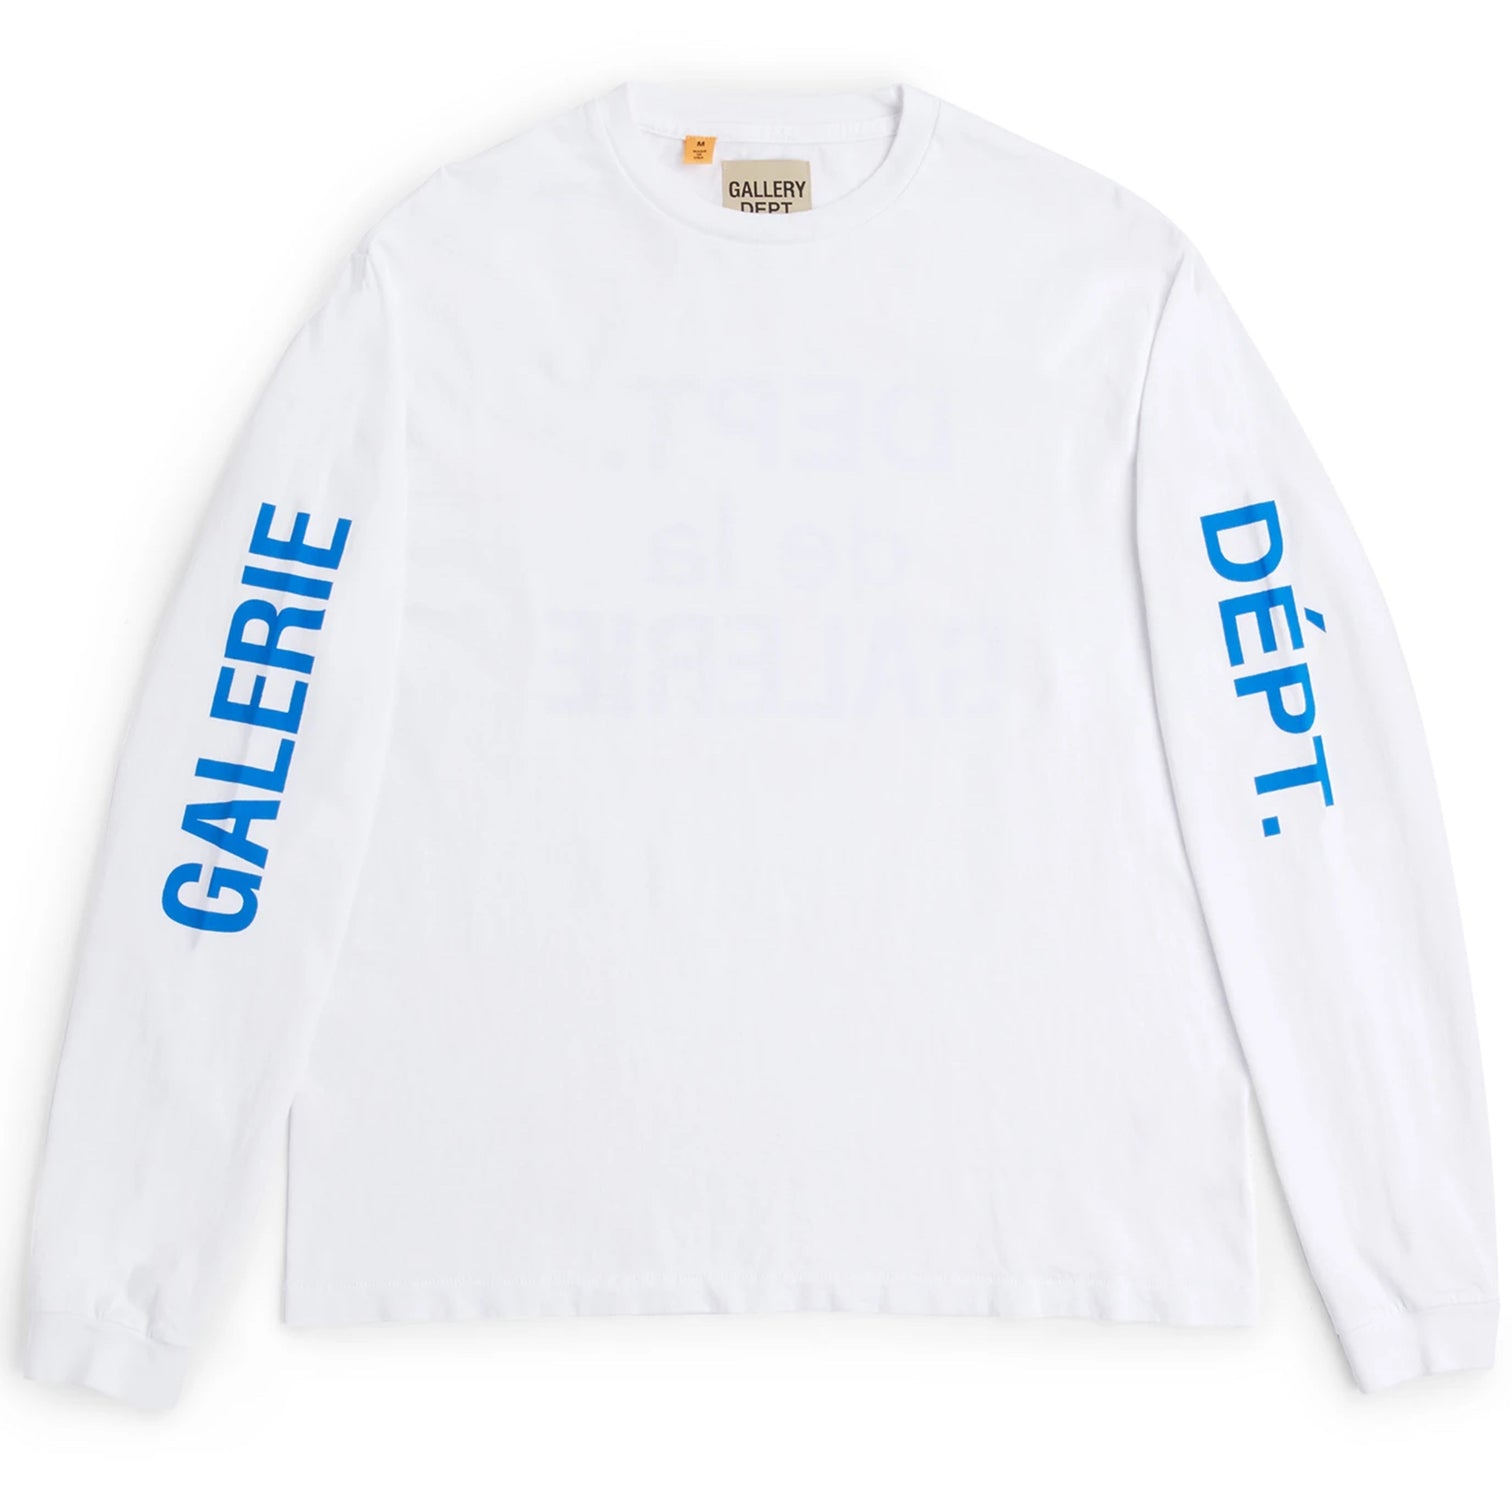 COLLECTOR - Gallery T-SHIRT Dept – WHITE online LONG SLEEVE FRENCH